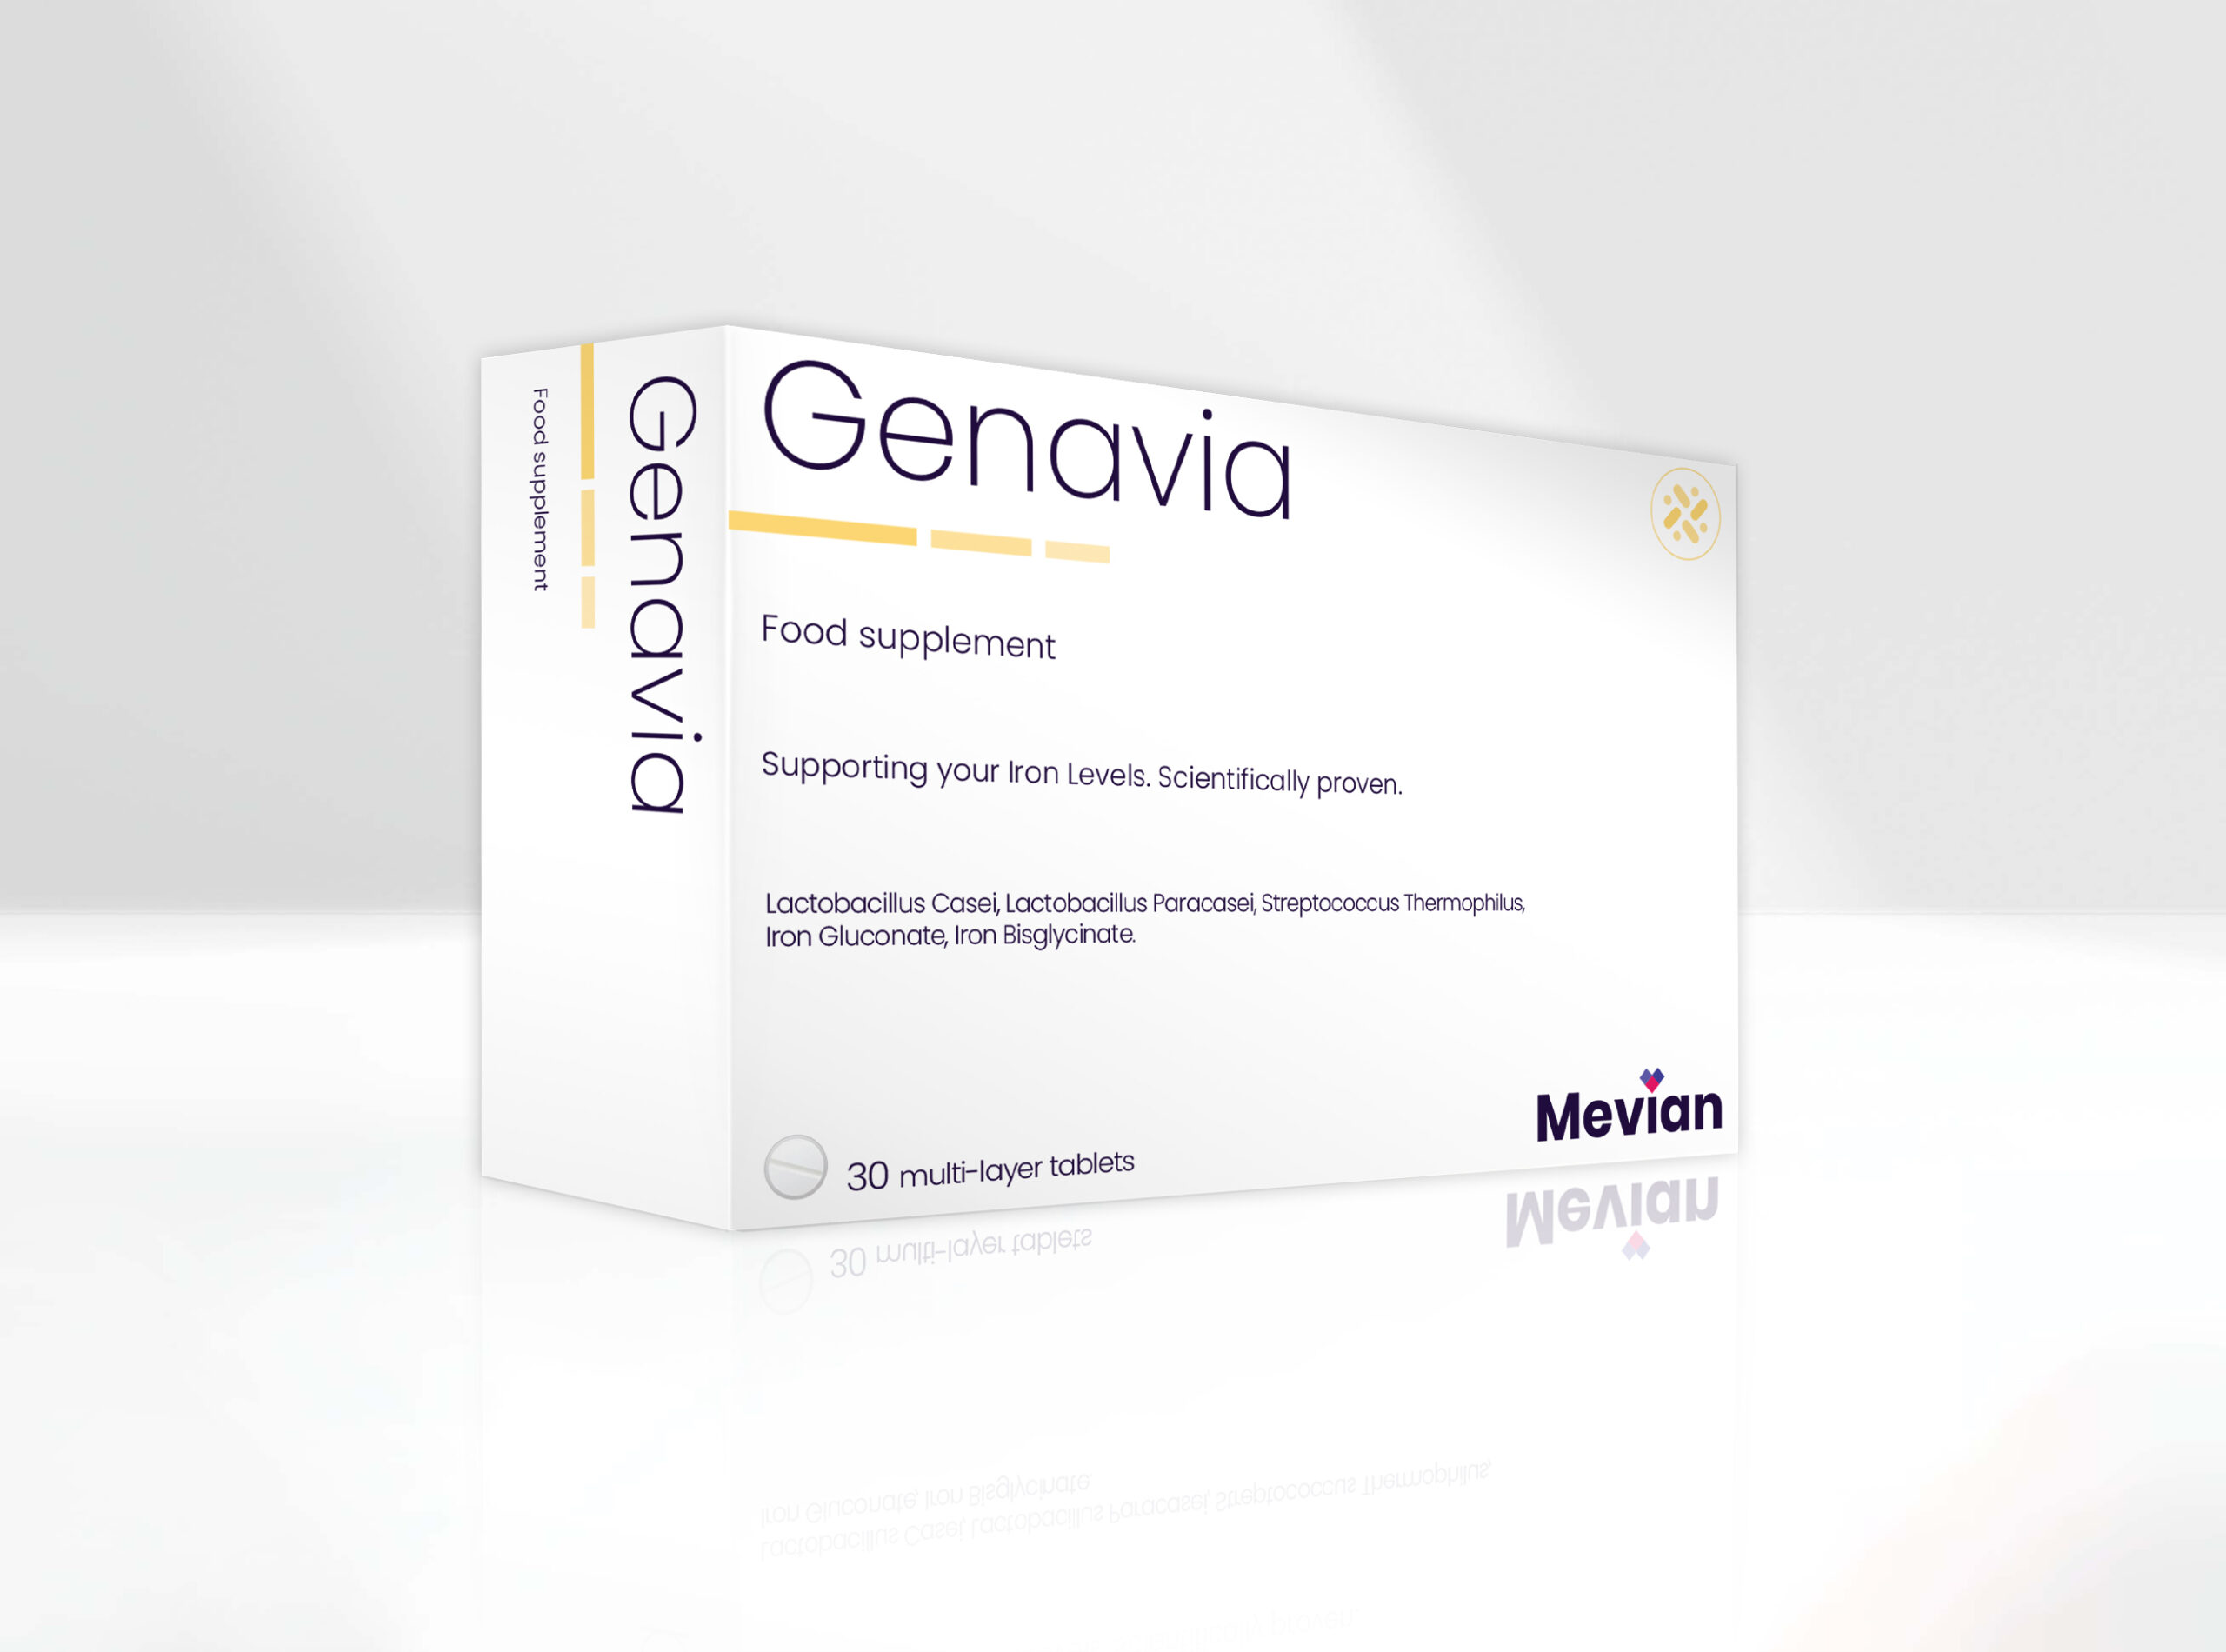 Genavia is a well-supported product with a supportive study on selected lactobacillus for improving iron absorption and minimizing unpleasant side effects from the iron source.